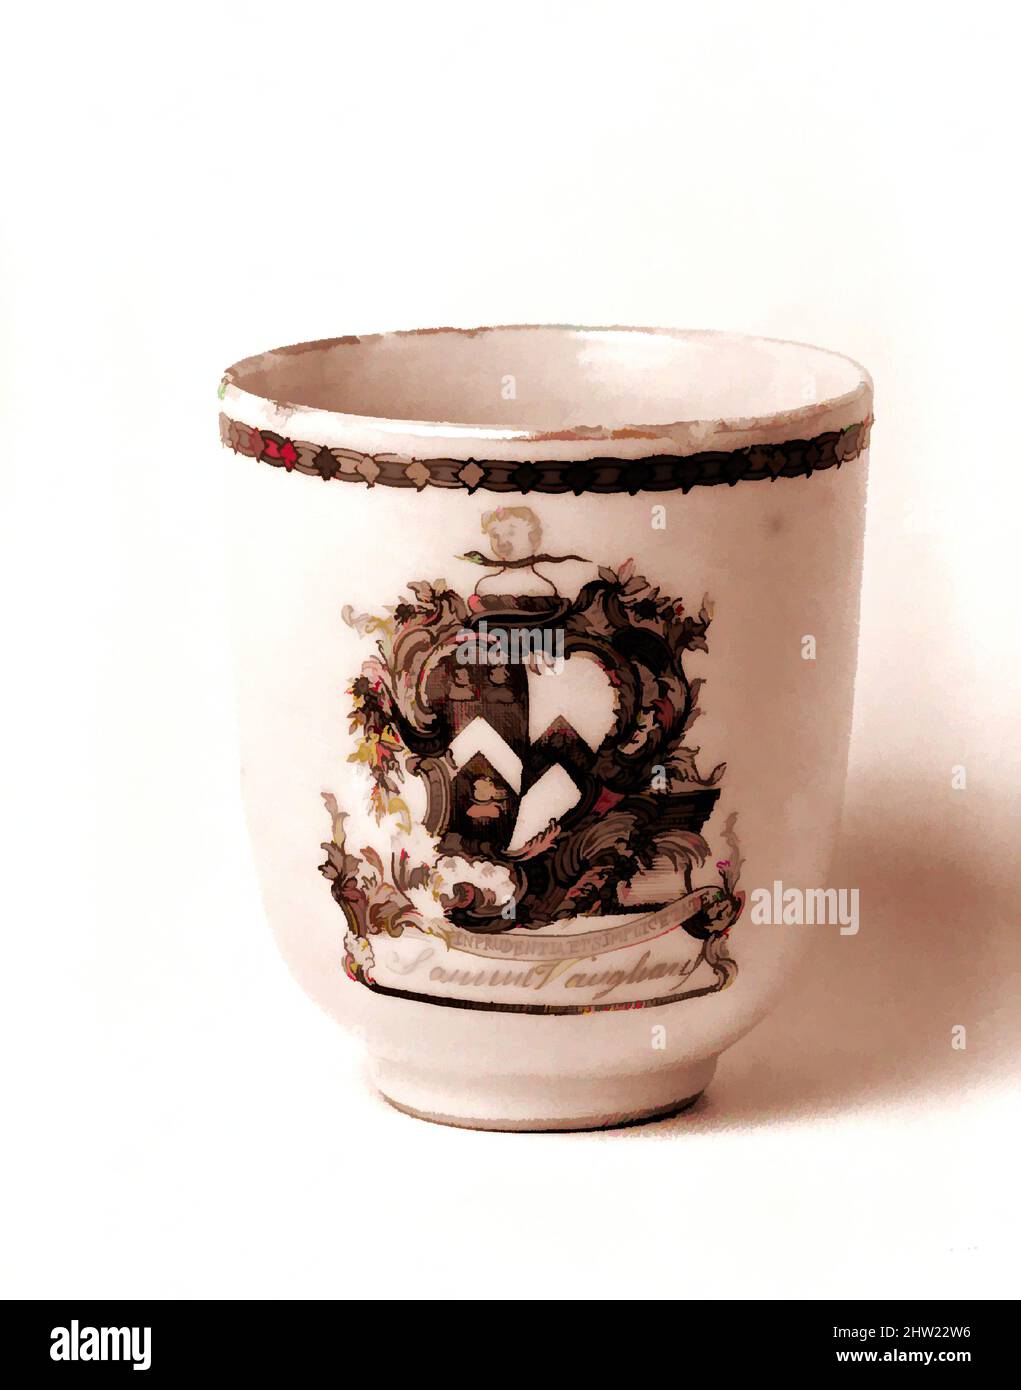 Art inspired by Cup, 1736–95, Made in China, Chinese, Porcelain, H. 2 1/2 in. (6.4 cm); Diam. 2 1/4 in. (5.7 cm), Ceramics, Classic works modernized by Artotop with a splash of modernity. Shapes, color and value, eye-catching visual impact on art. Emotions through freedom of artworks in a contemporary way. A timeless message pursuing a wildly creative new direction. Artists turning to the digital medium and creating the Artotop NFT Stock Photo